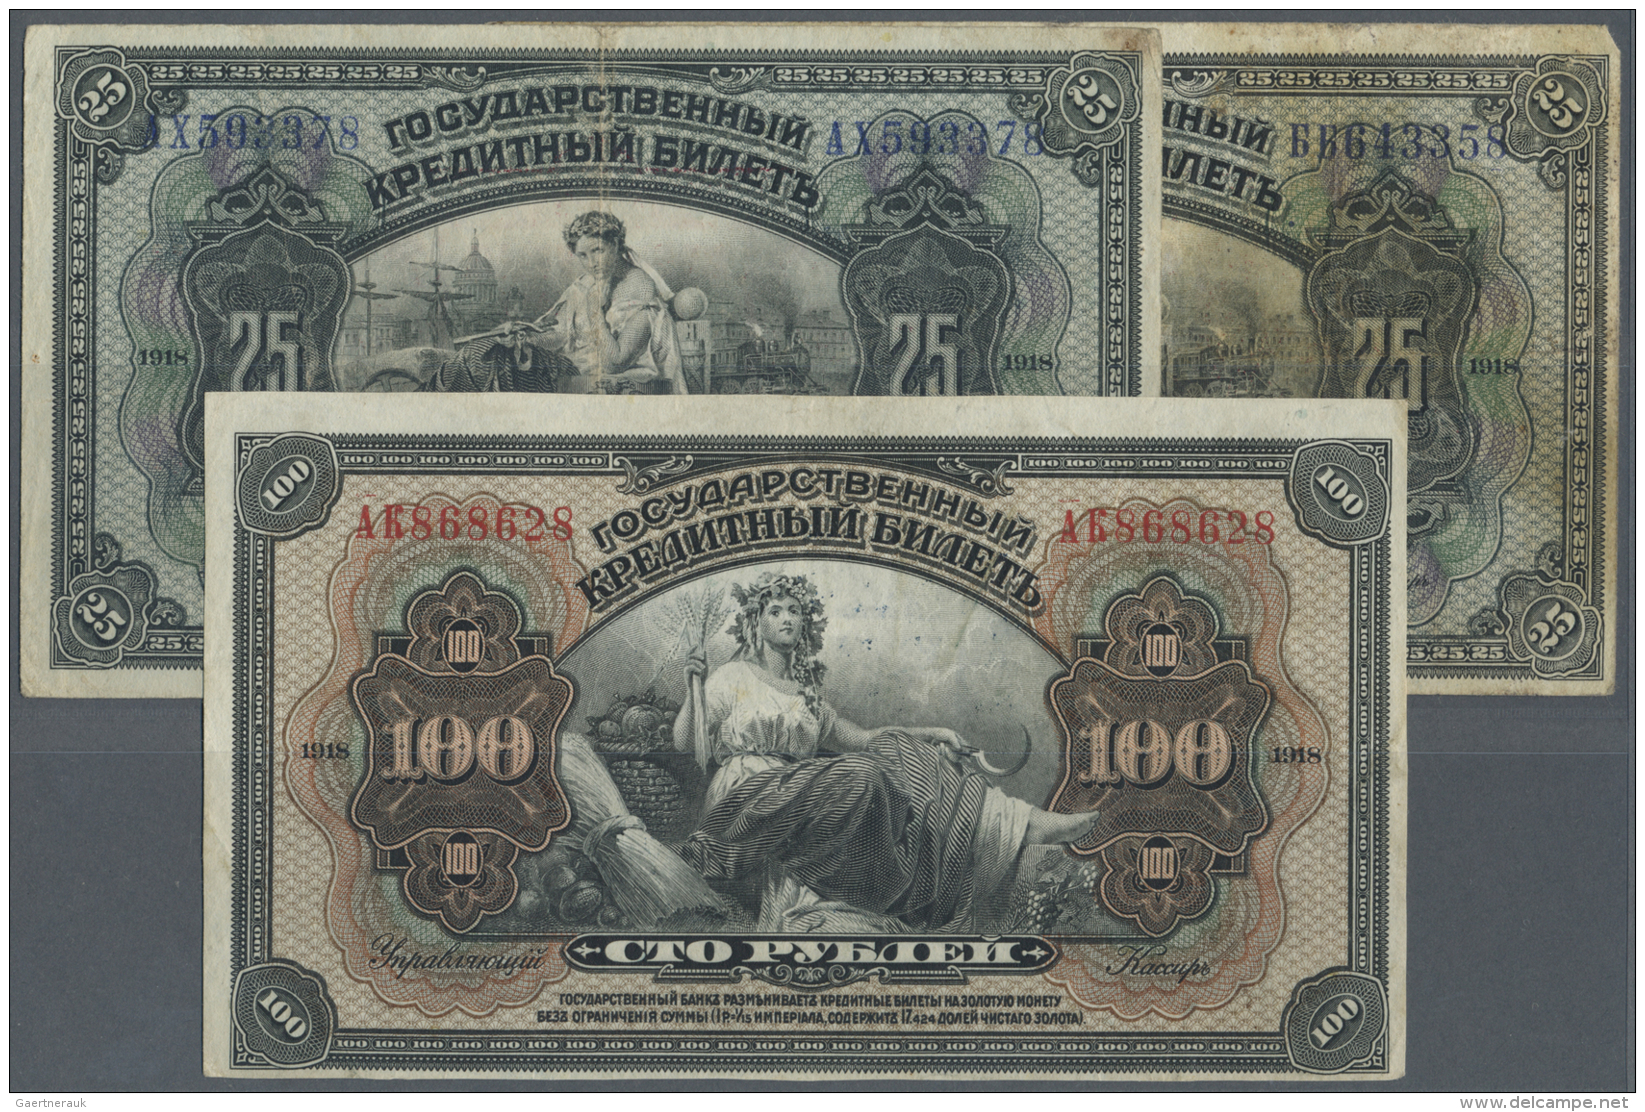 Russia / Russland: East Siberia, Pribaikal Region Set With 3 Banknotes 2 X 25 And 100 Rubles 1918, P.S1196, 1197 In F-/F - Russie